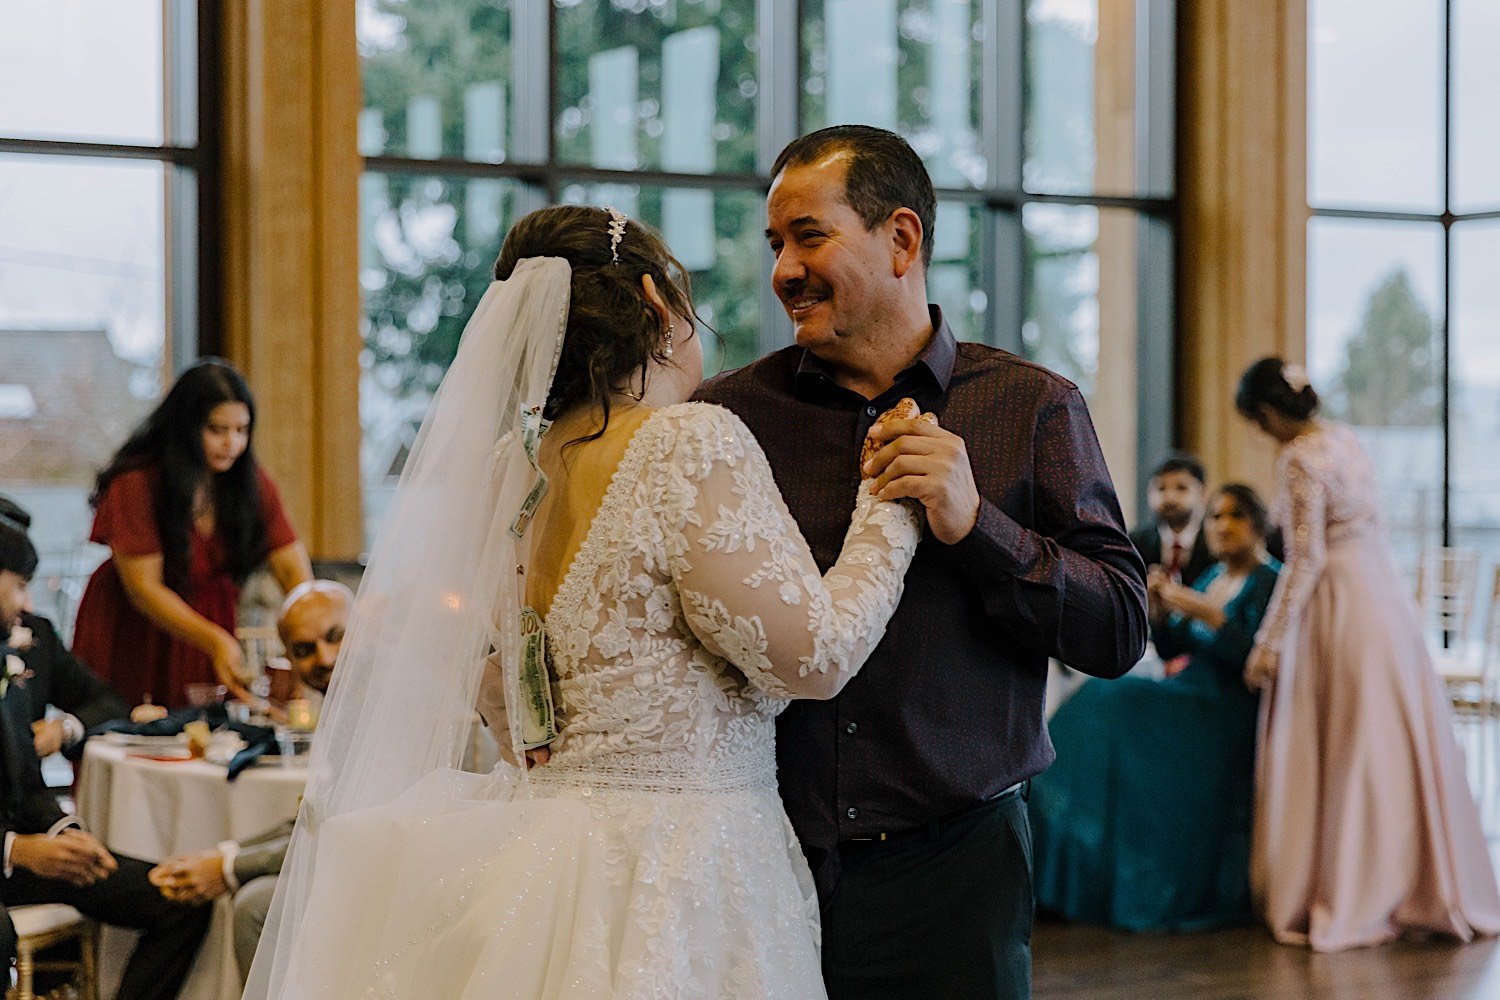 Bride shares a dance with her father as guests watch in the background